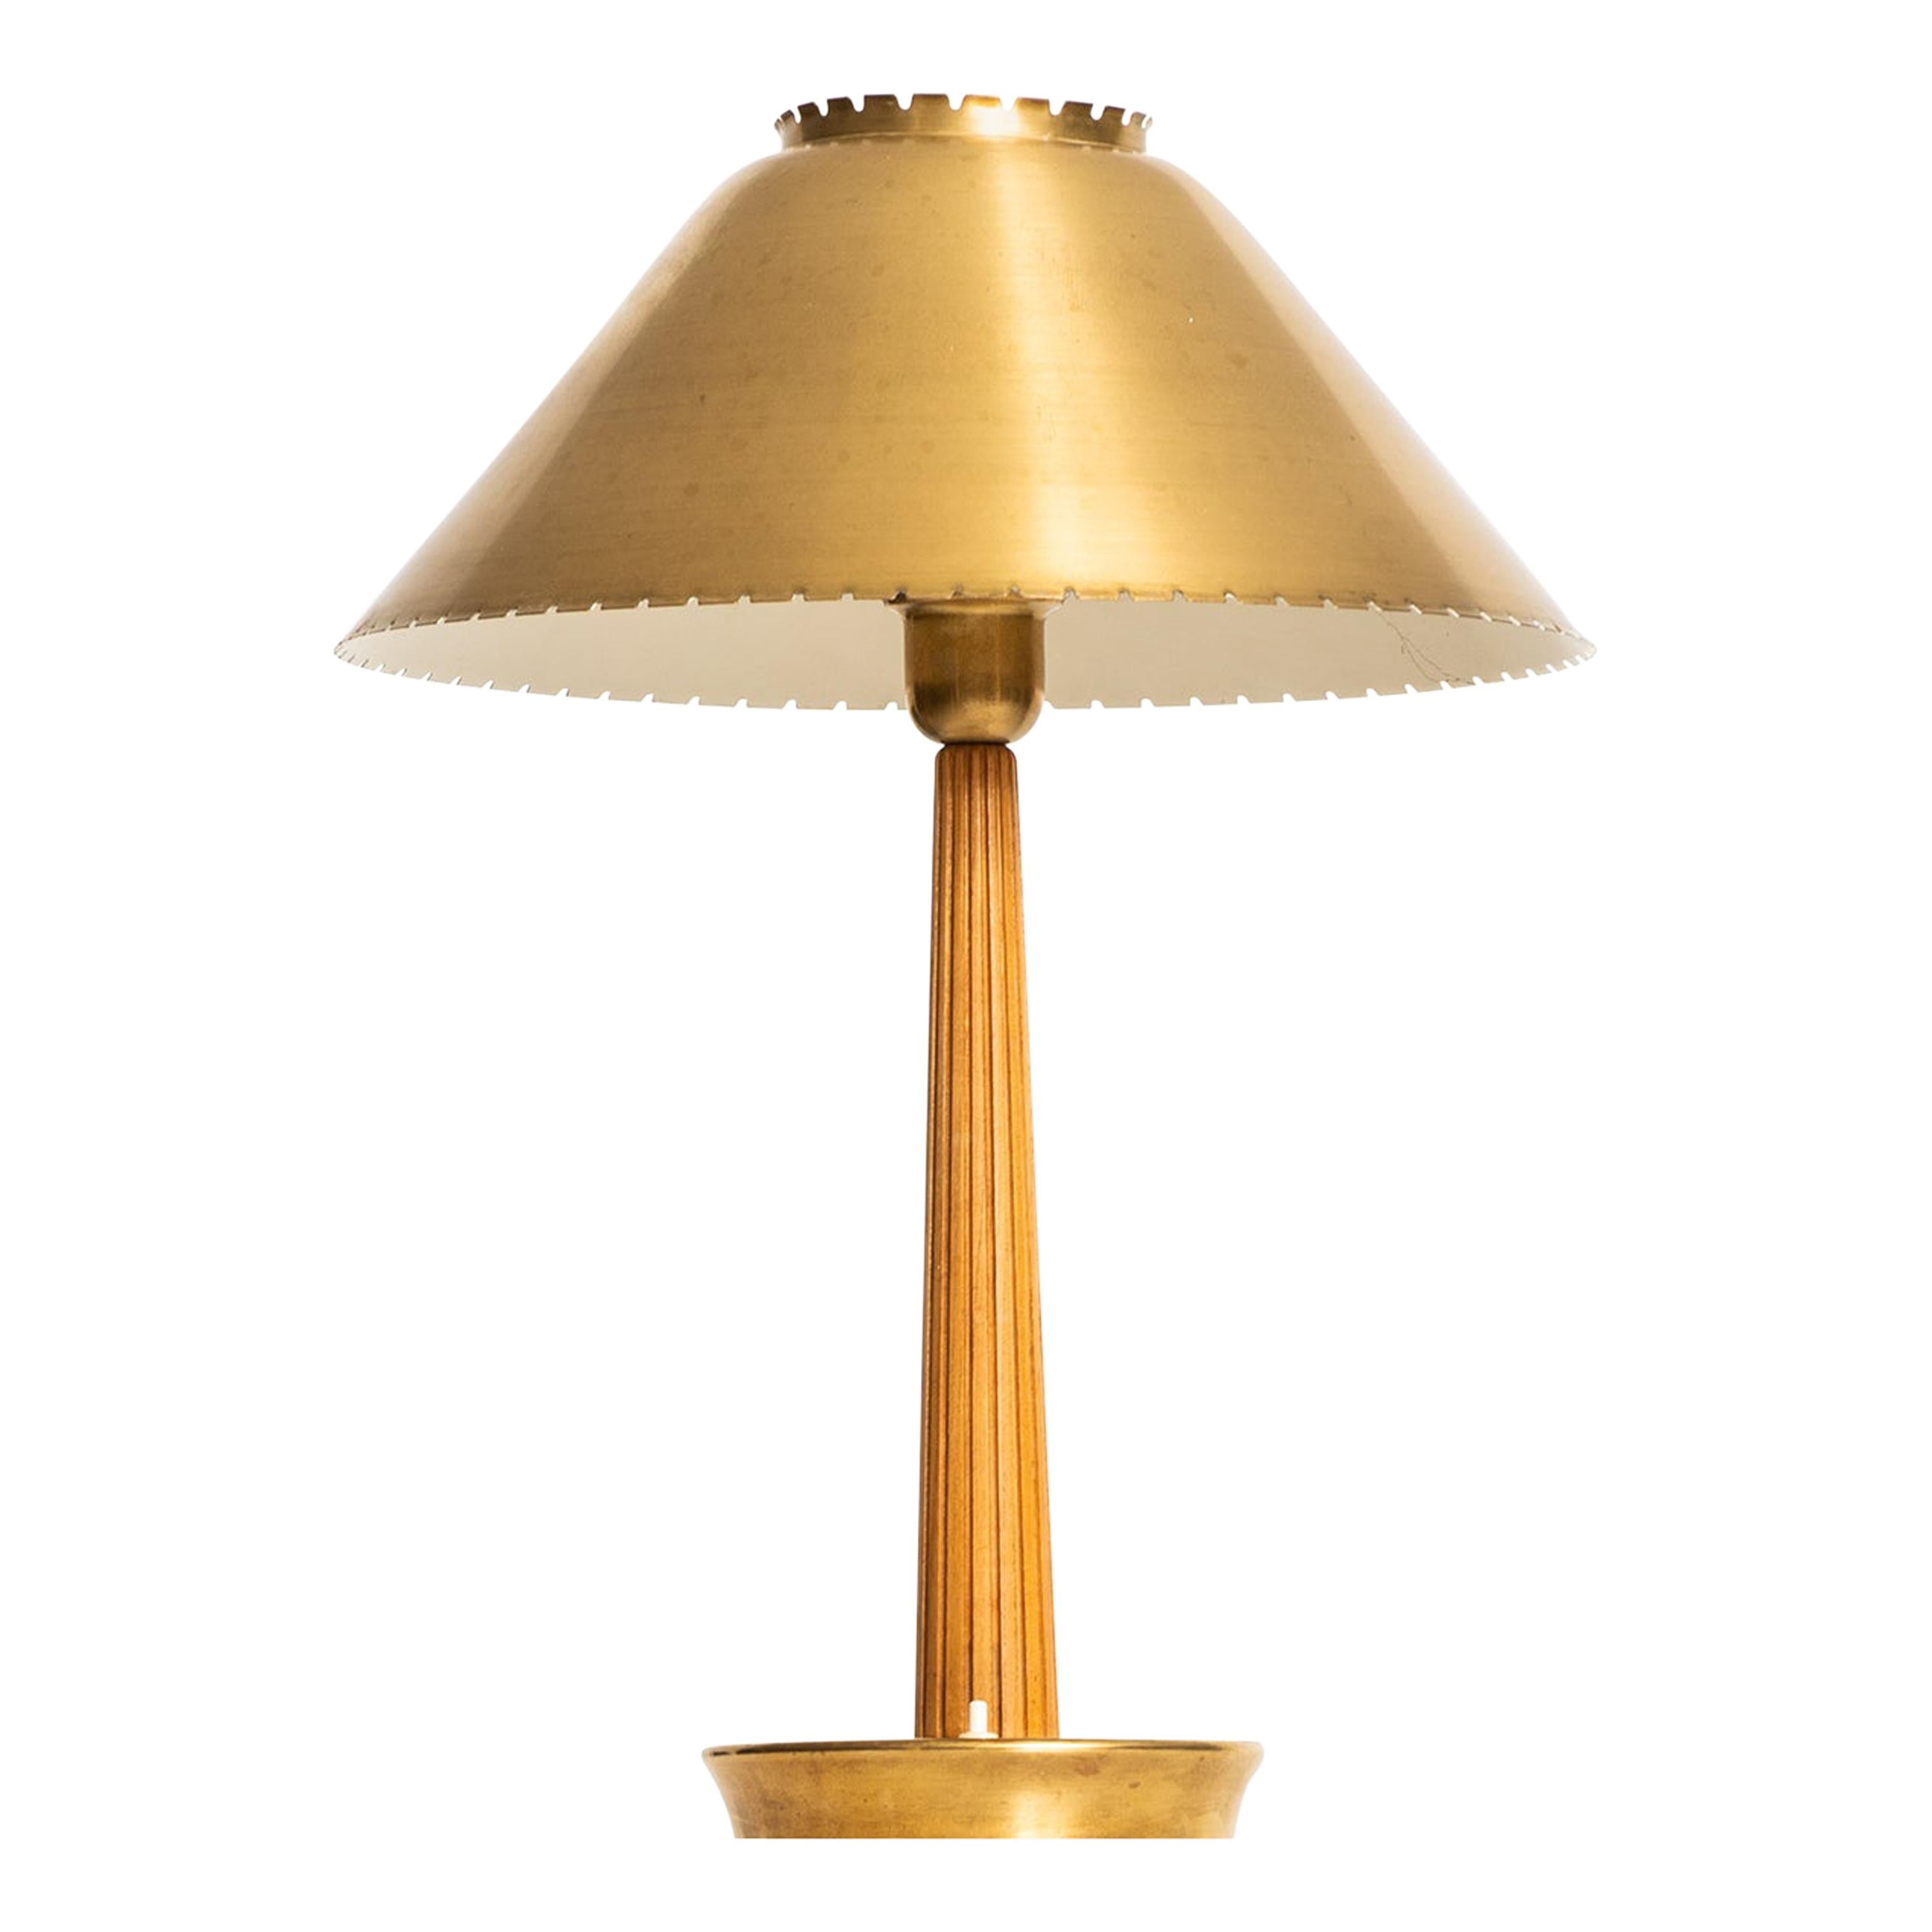 Hans Bergström Table Lamp Produced by ASEA in Sweden